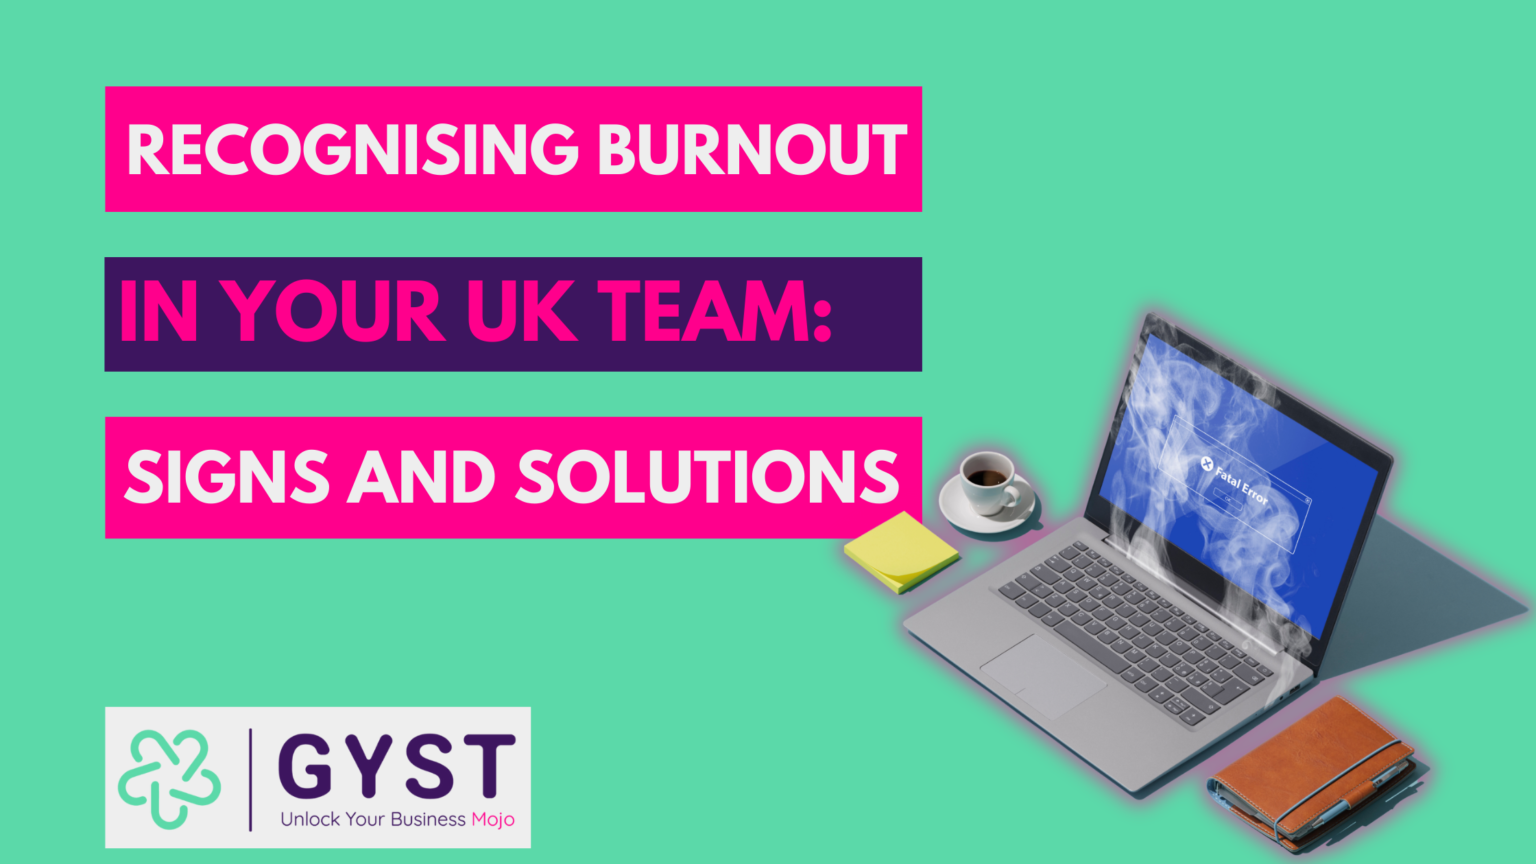 Recognising Burnout in Your UK Team: Signs and Solutions, Workplace Wellbeing, Occupational Health, Burnout Prevention, Workplace Wellness Coach in the UK